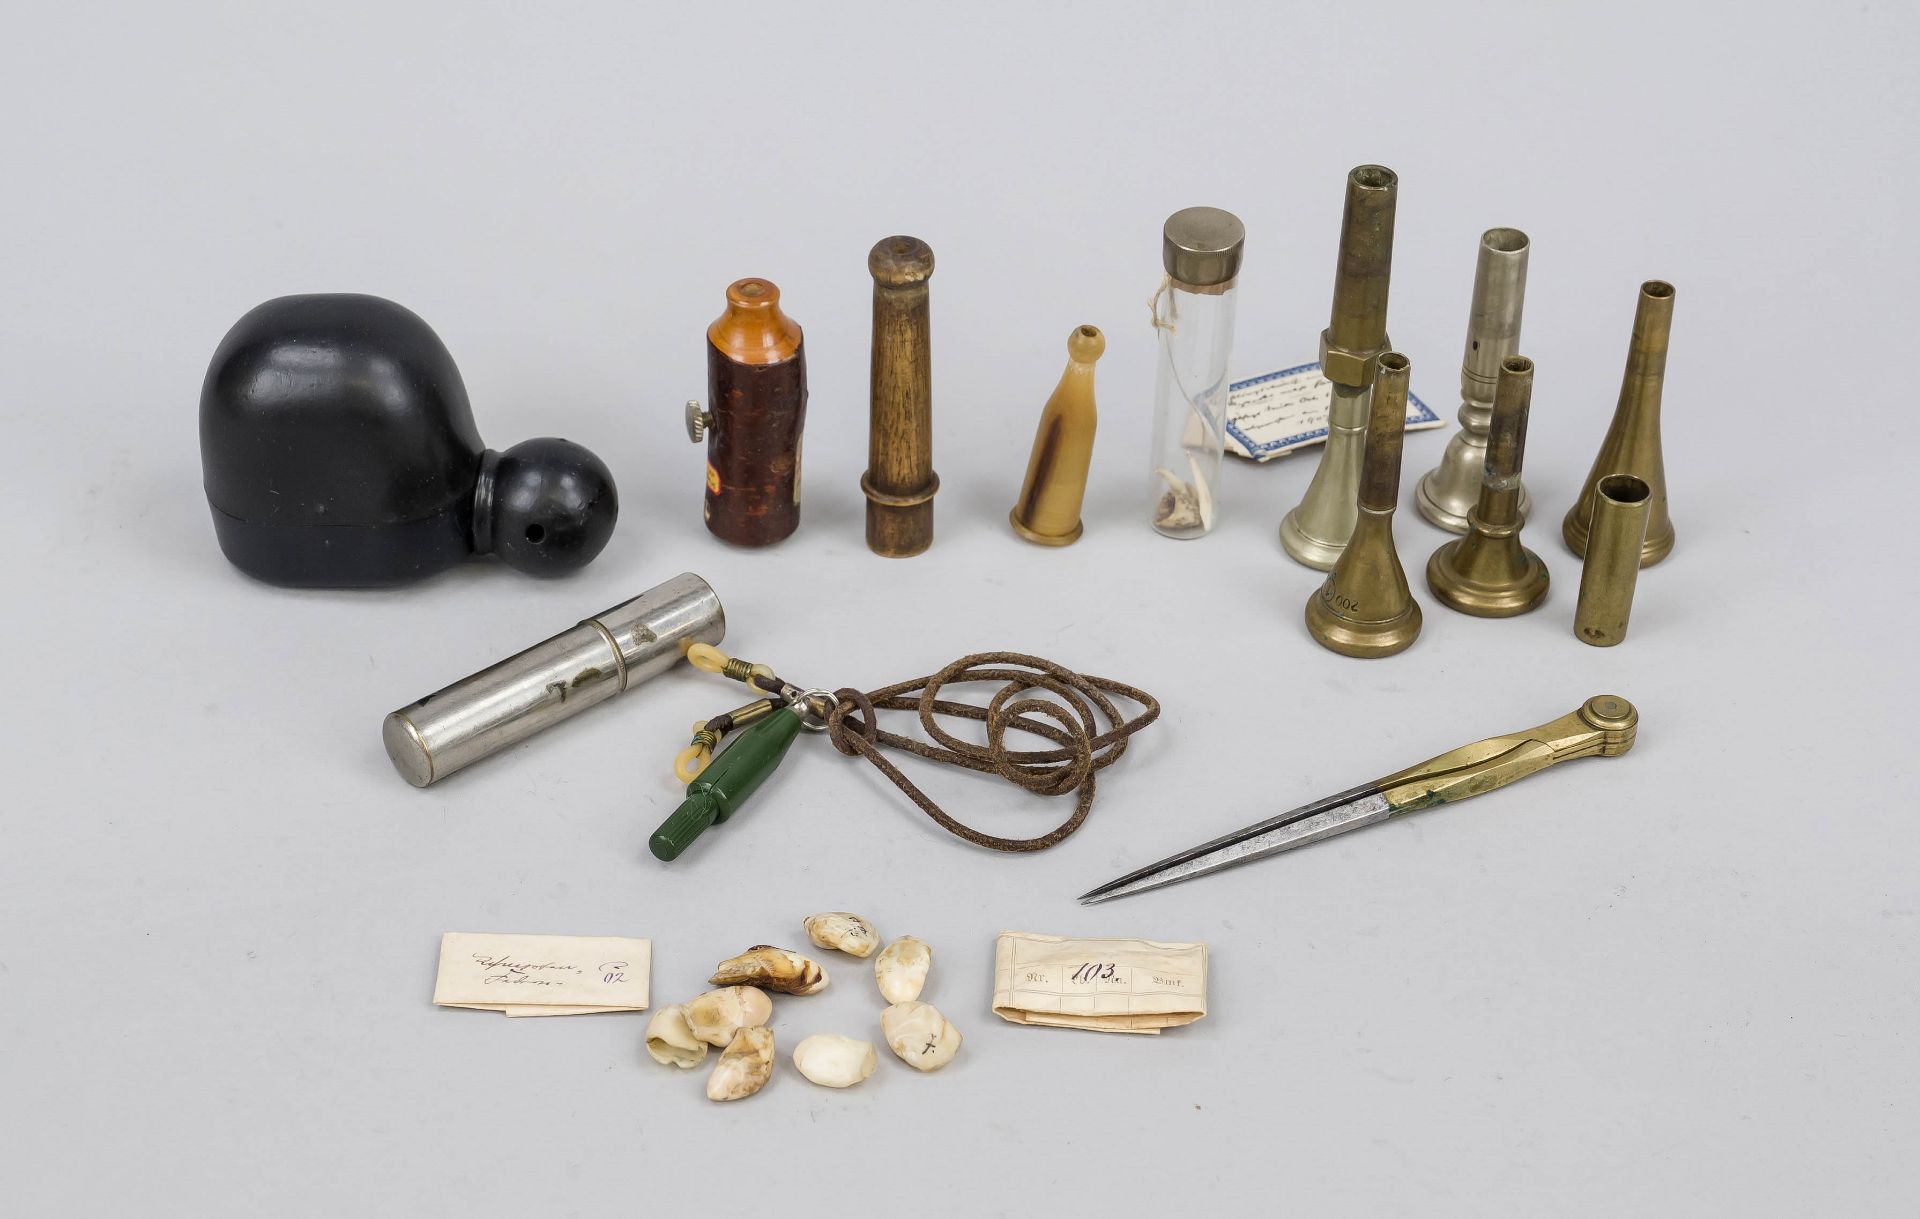 Hunting bundle of grandels and decoy whistles, 19th/20th century. Approx. 100 grandels, some still